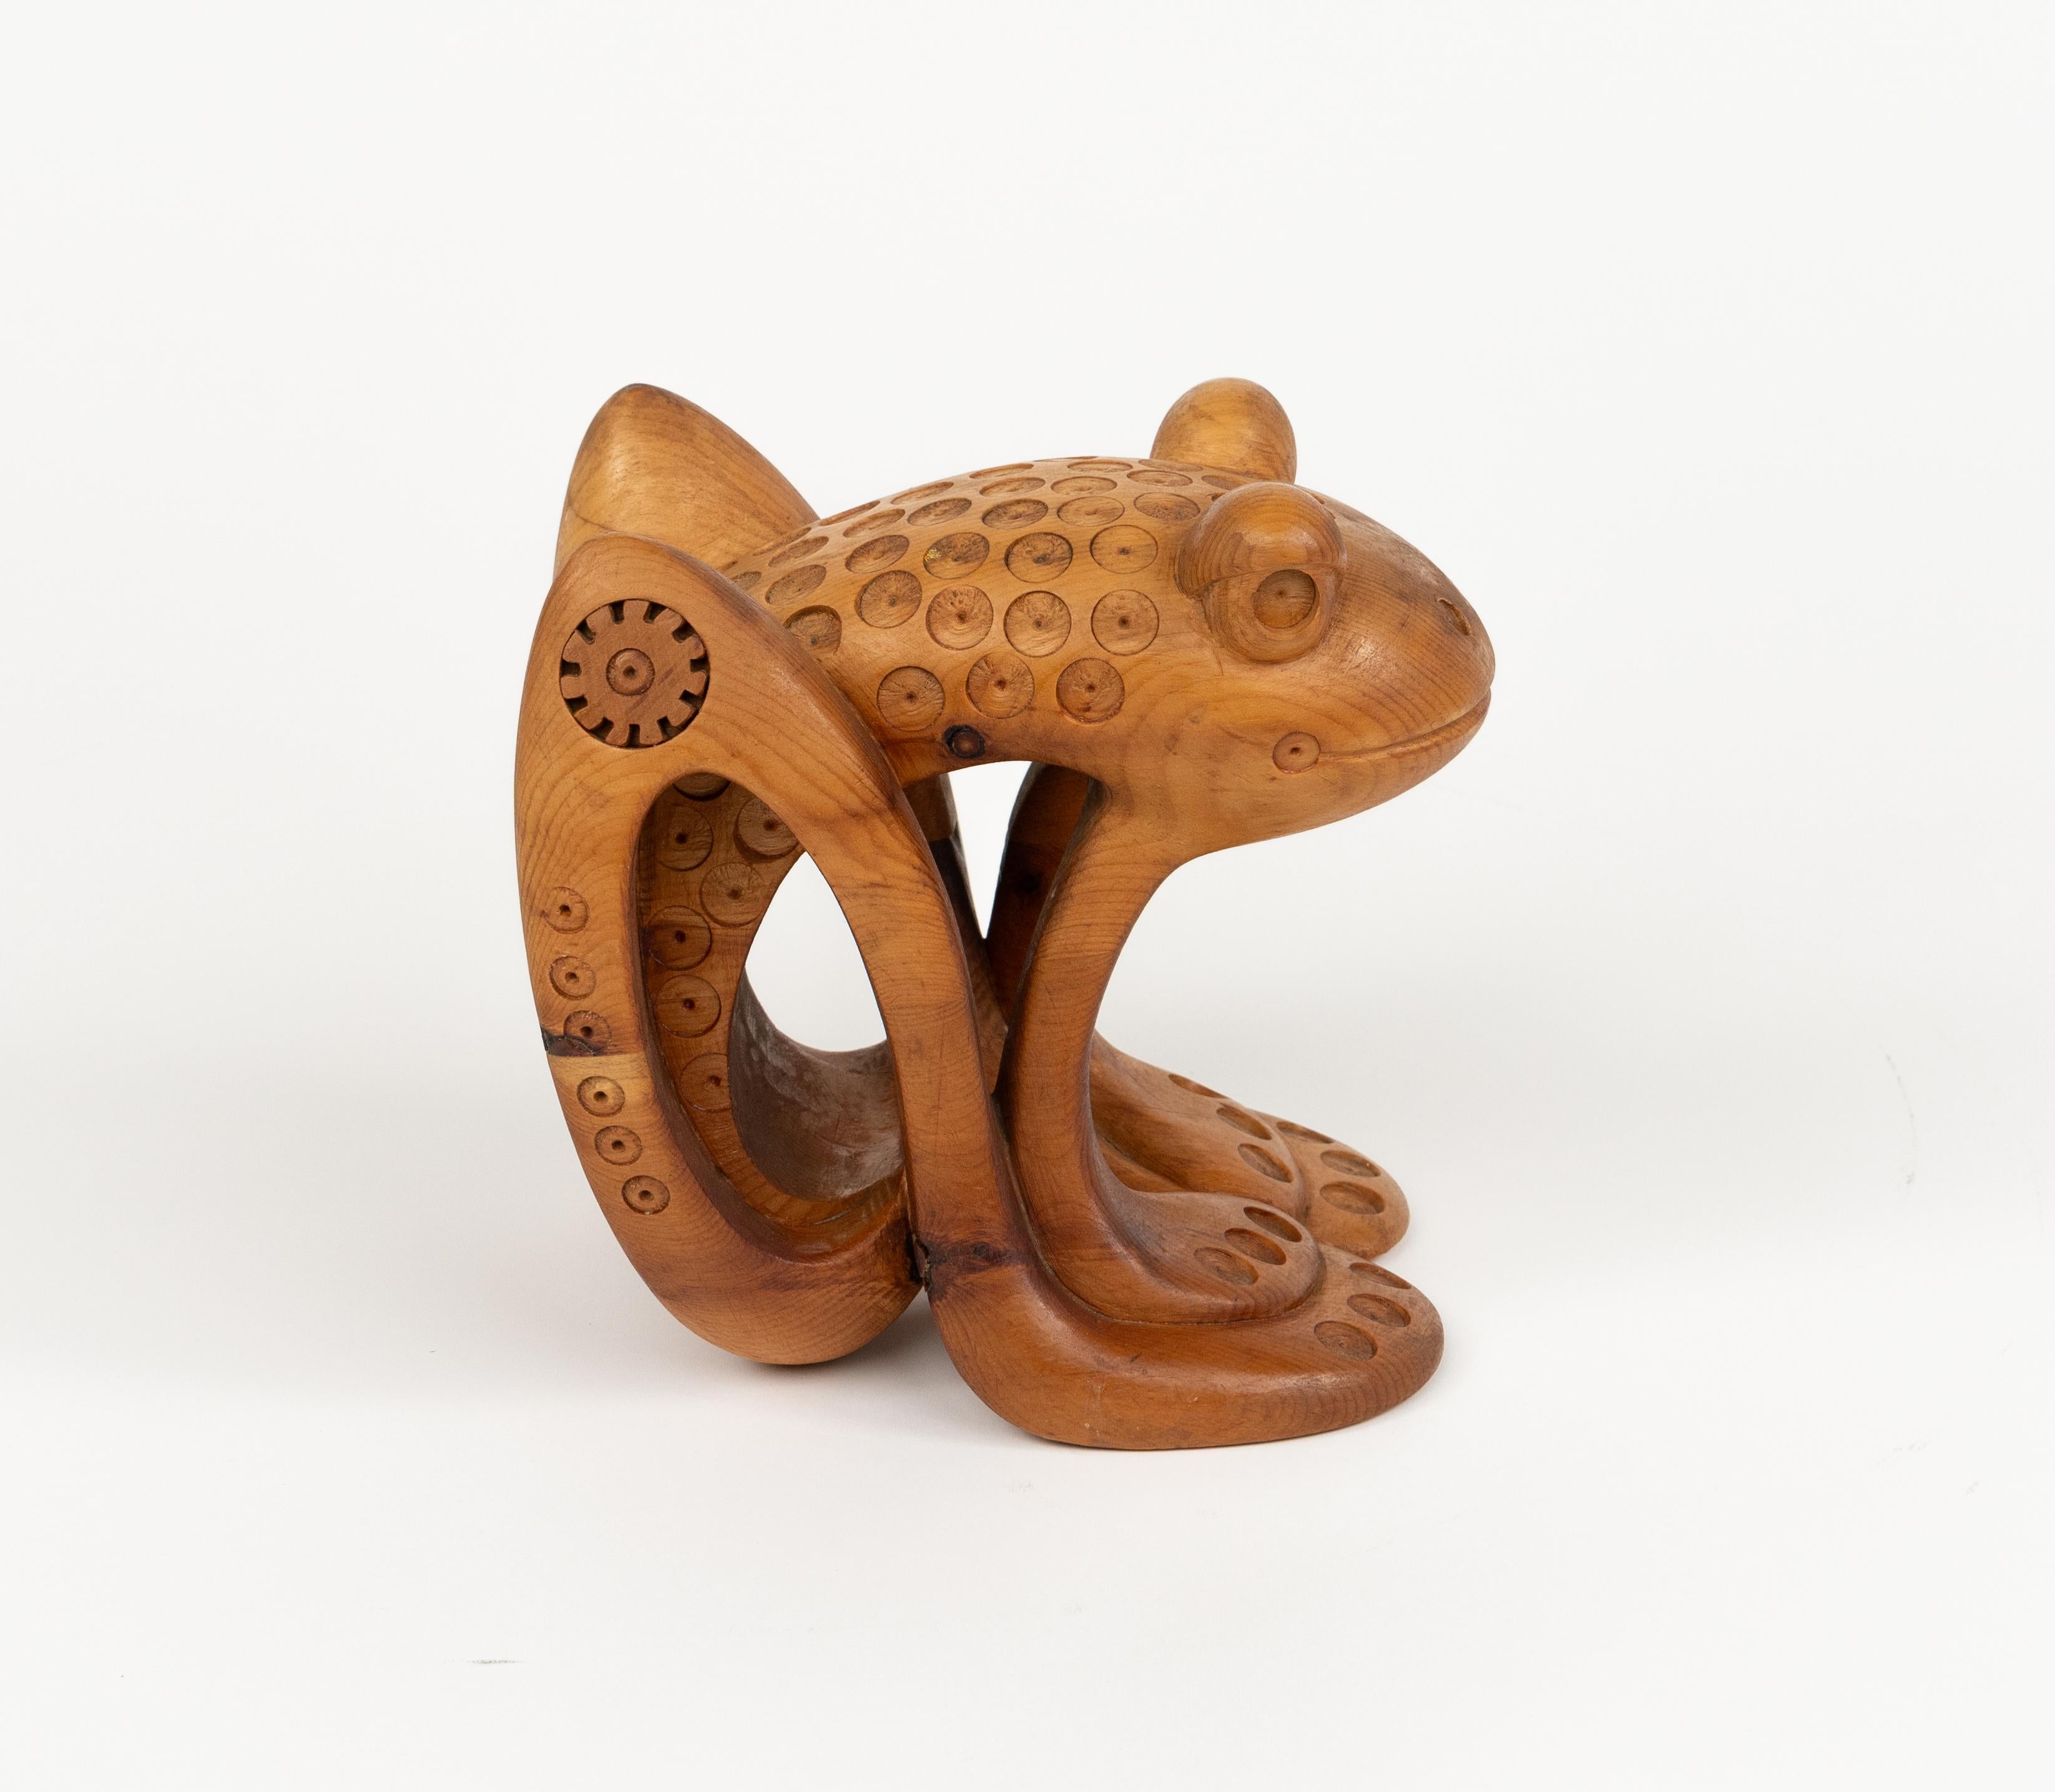 Pine Wood Decorative Sculpture Shape Frog by Ferdinando Codognotto, Italy 2001 For Sale 5